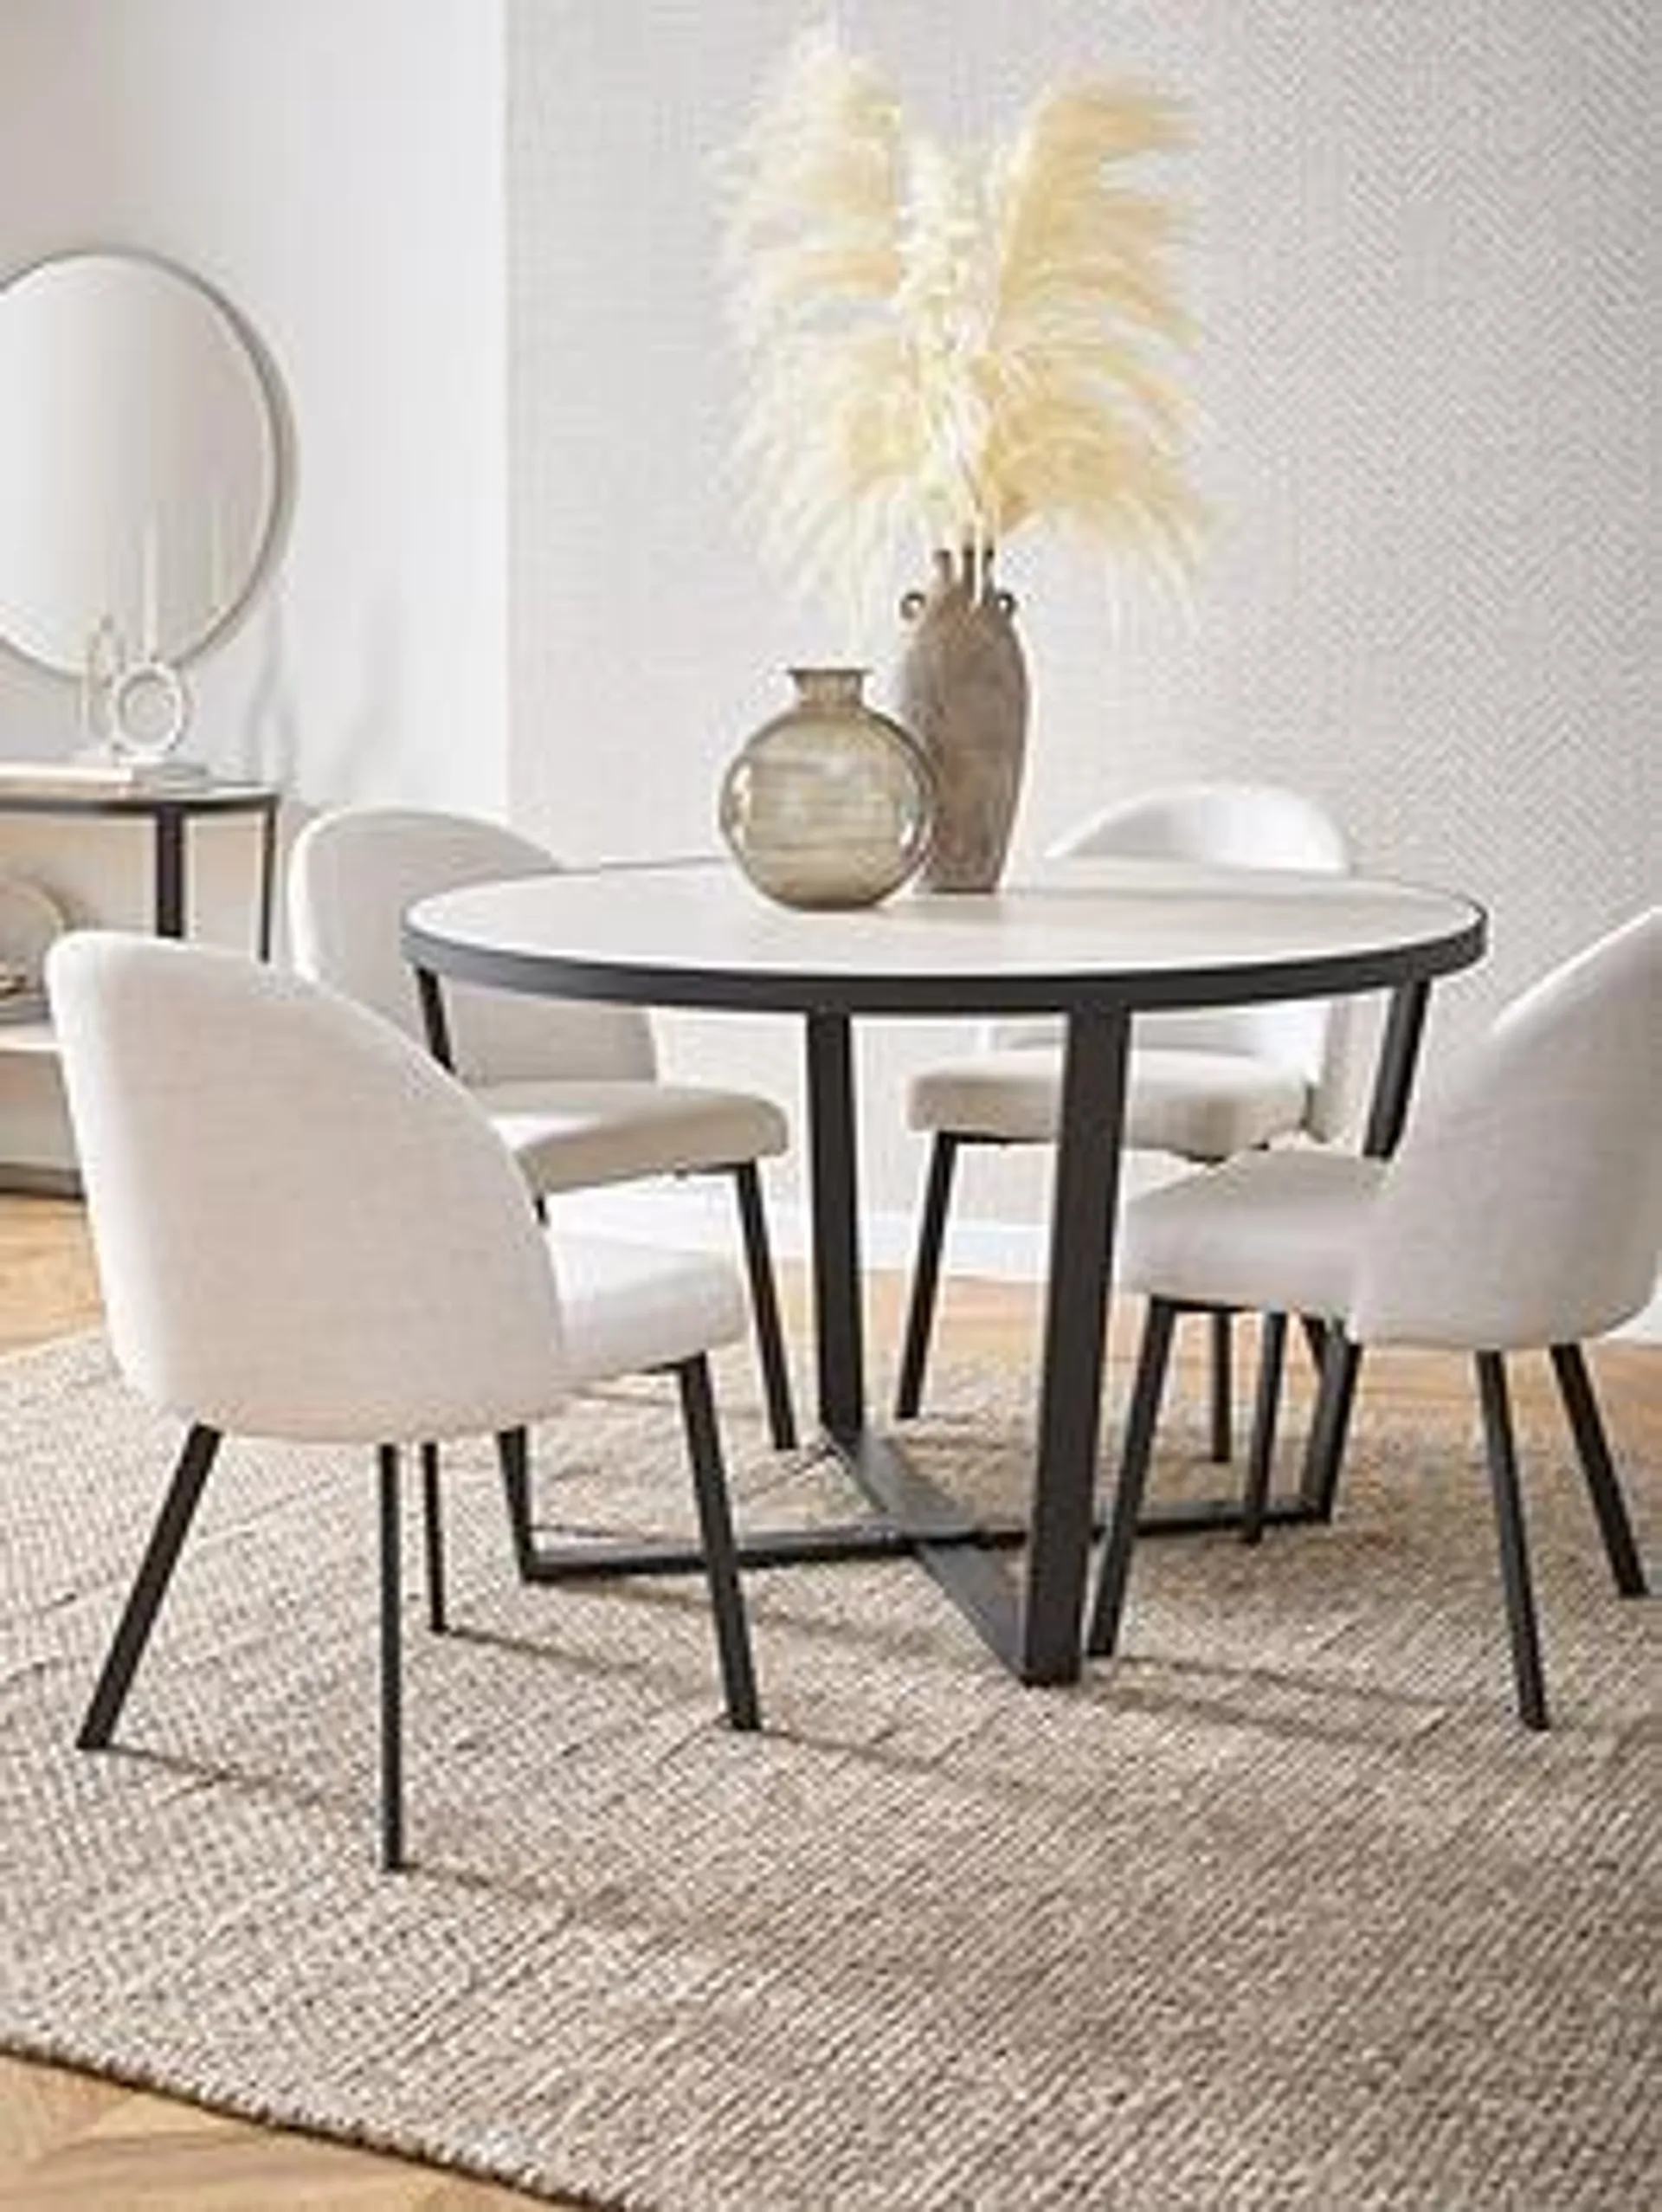 Cortes 120 cm Ceramic Top Dining Table + 4 Chairs